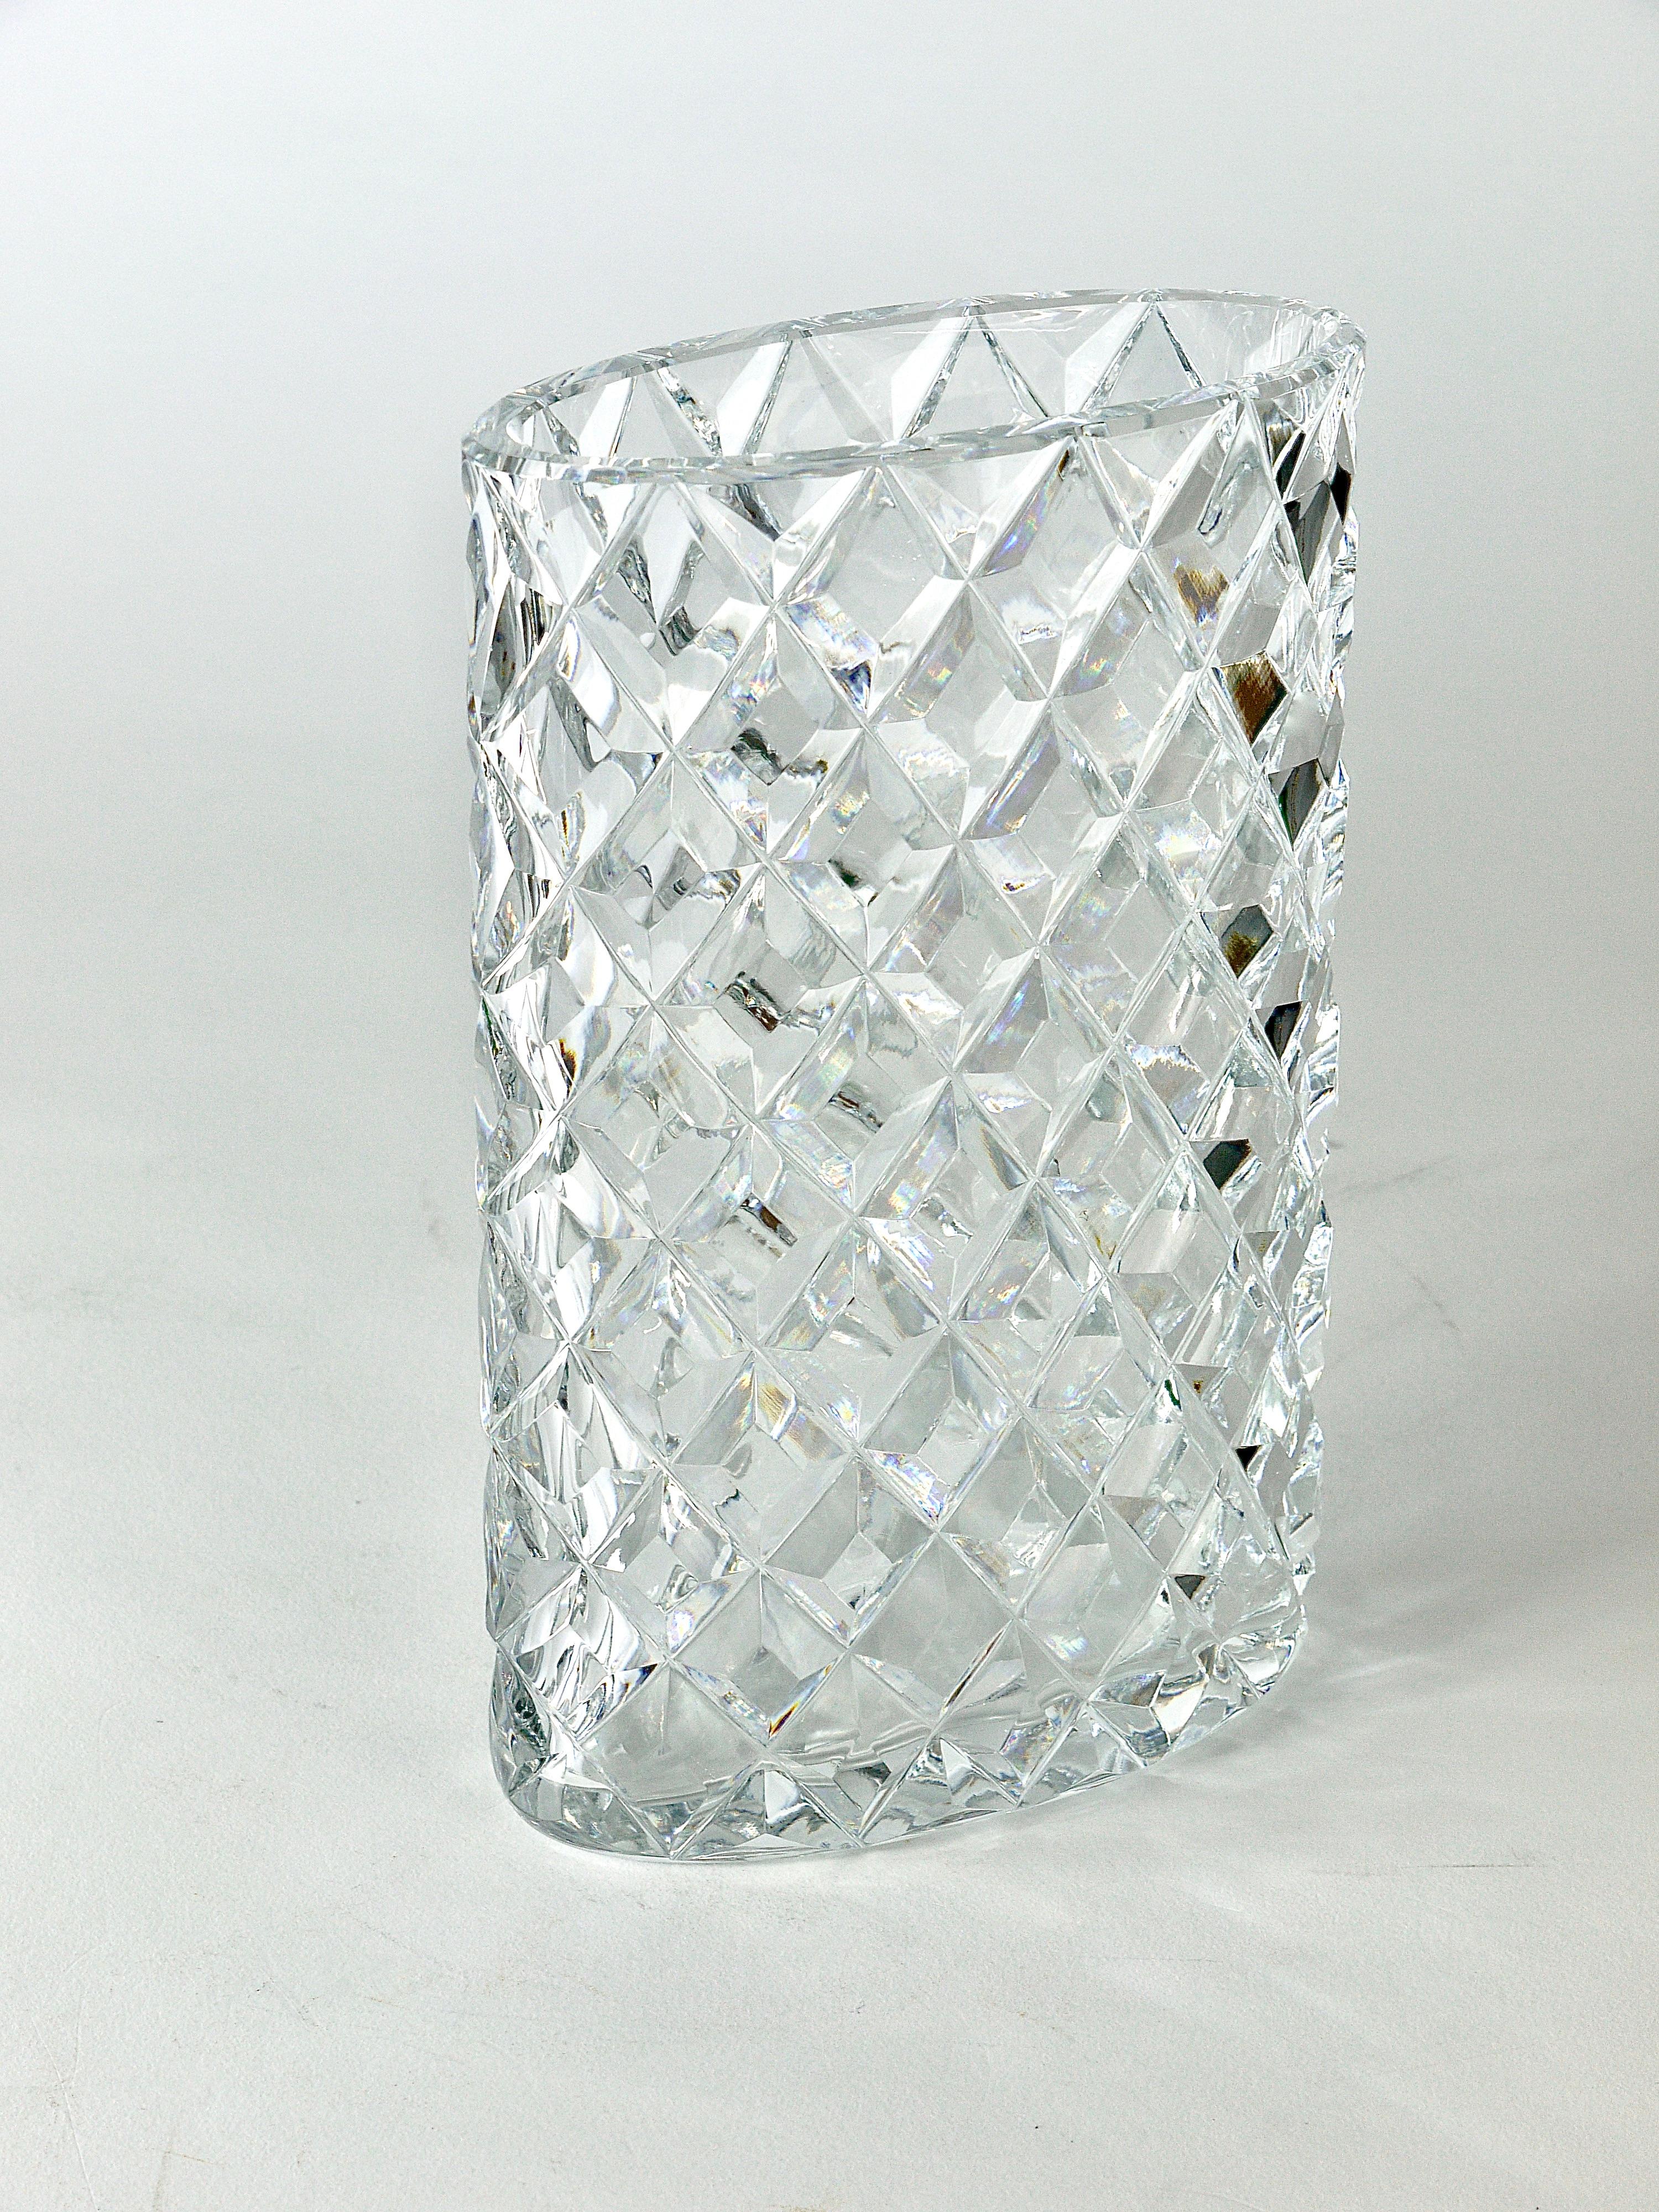 Sparkling Facetted Crystal Glass Vase by Claus Josef Riedel, Austria, 1970s For Sale 7